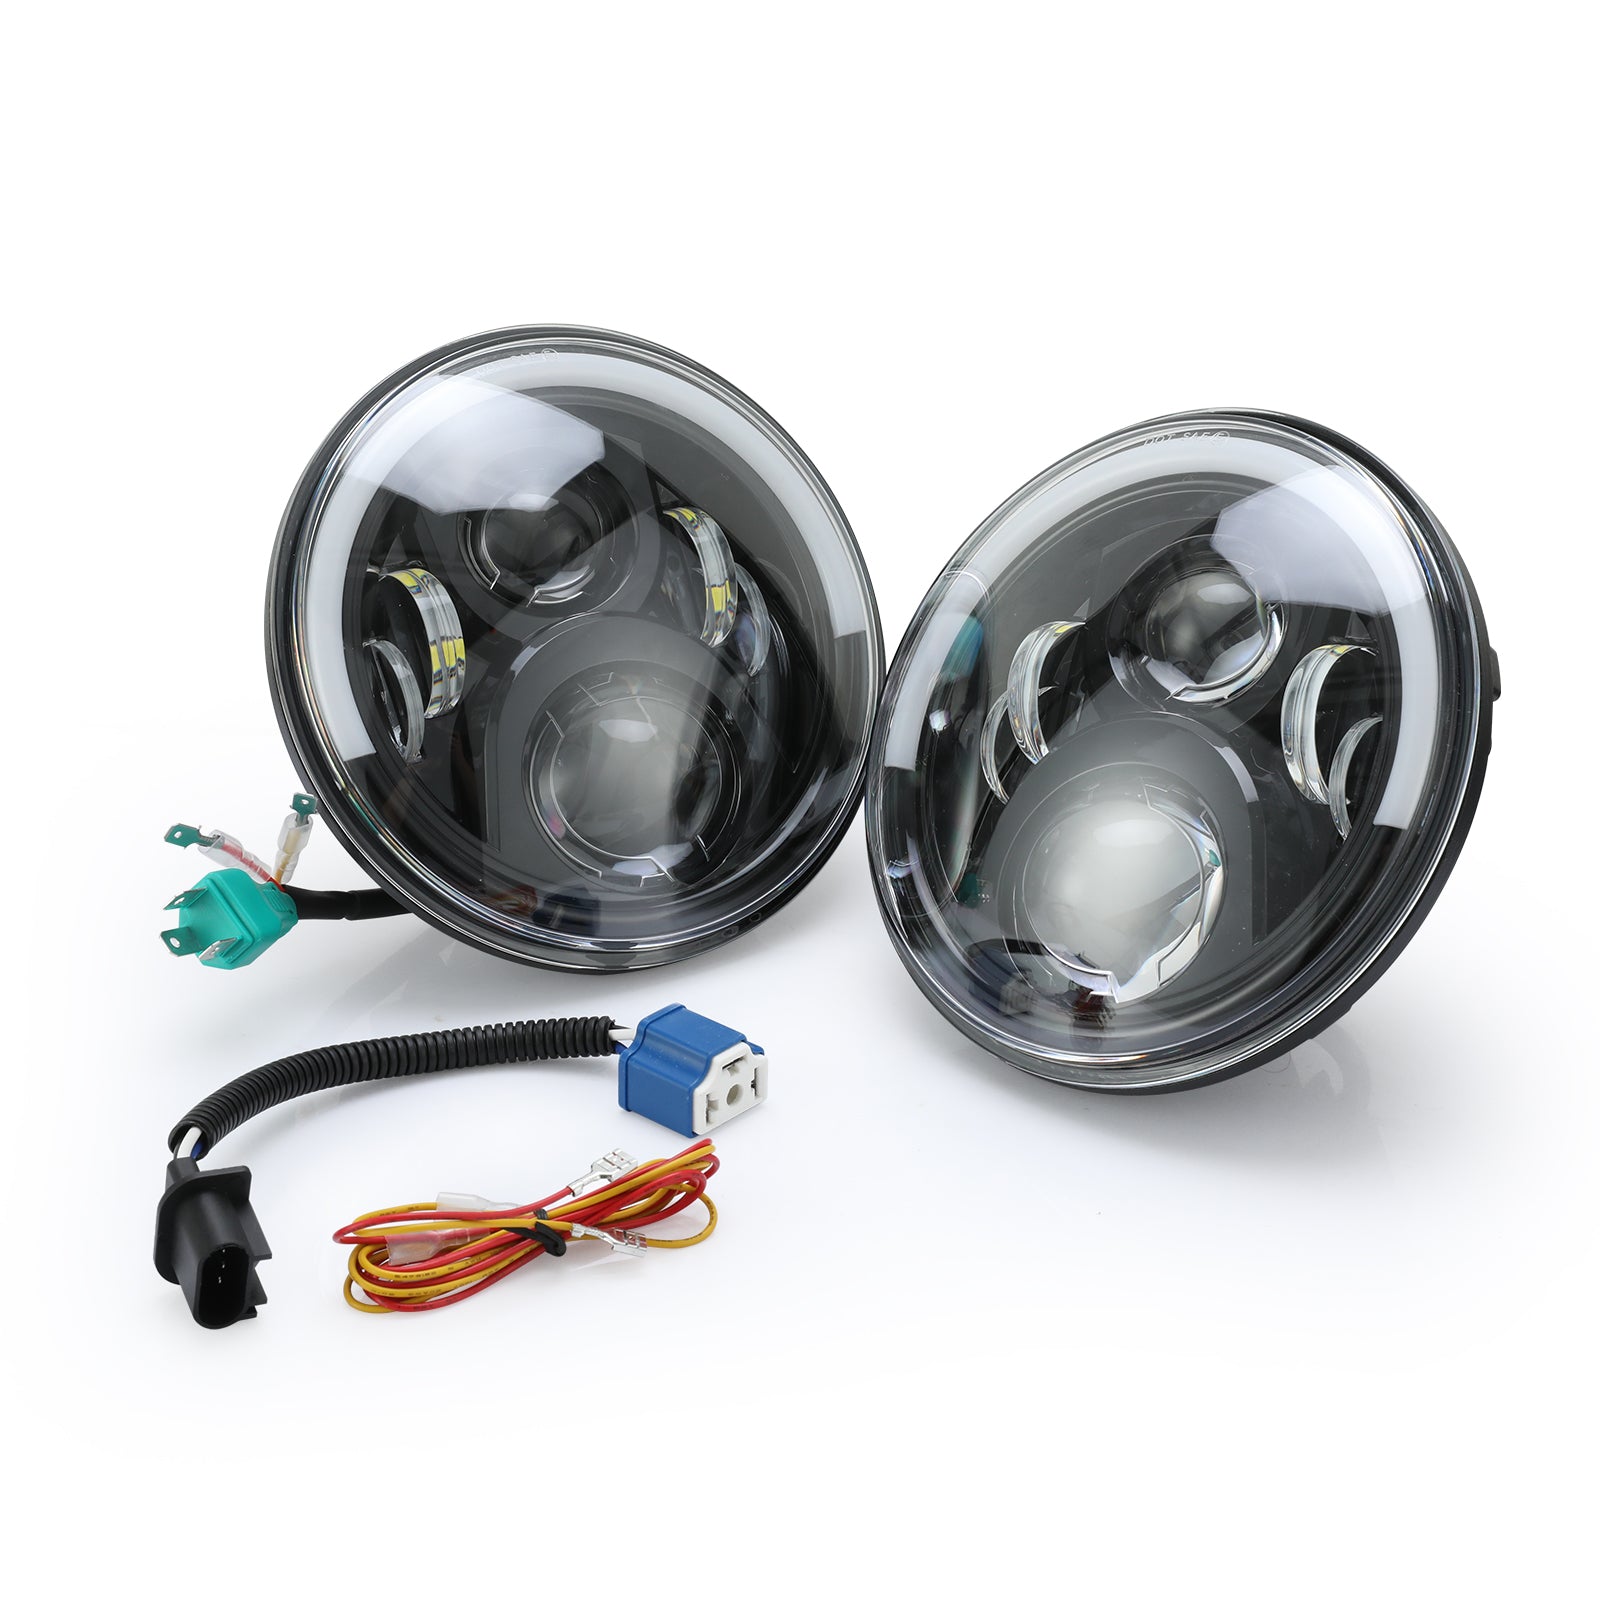 7-inch Round LED Head Light With Plug Compatible with Jeep Wrangler Jeep Cj Hummer Head Light OPENROAD A pair 7-inch LED Head Light  